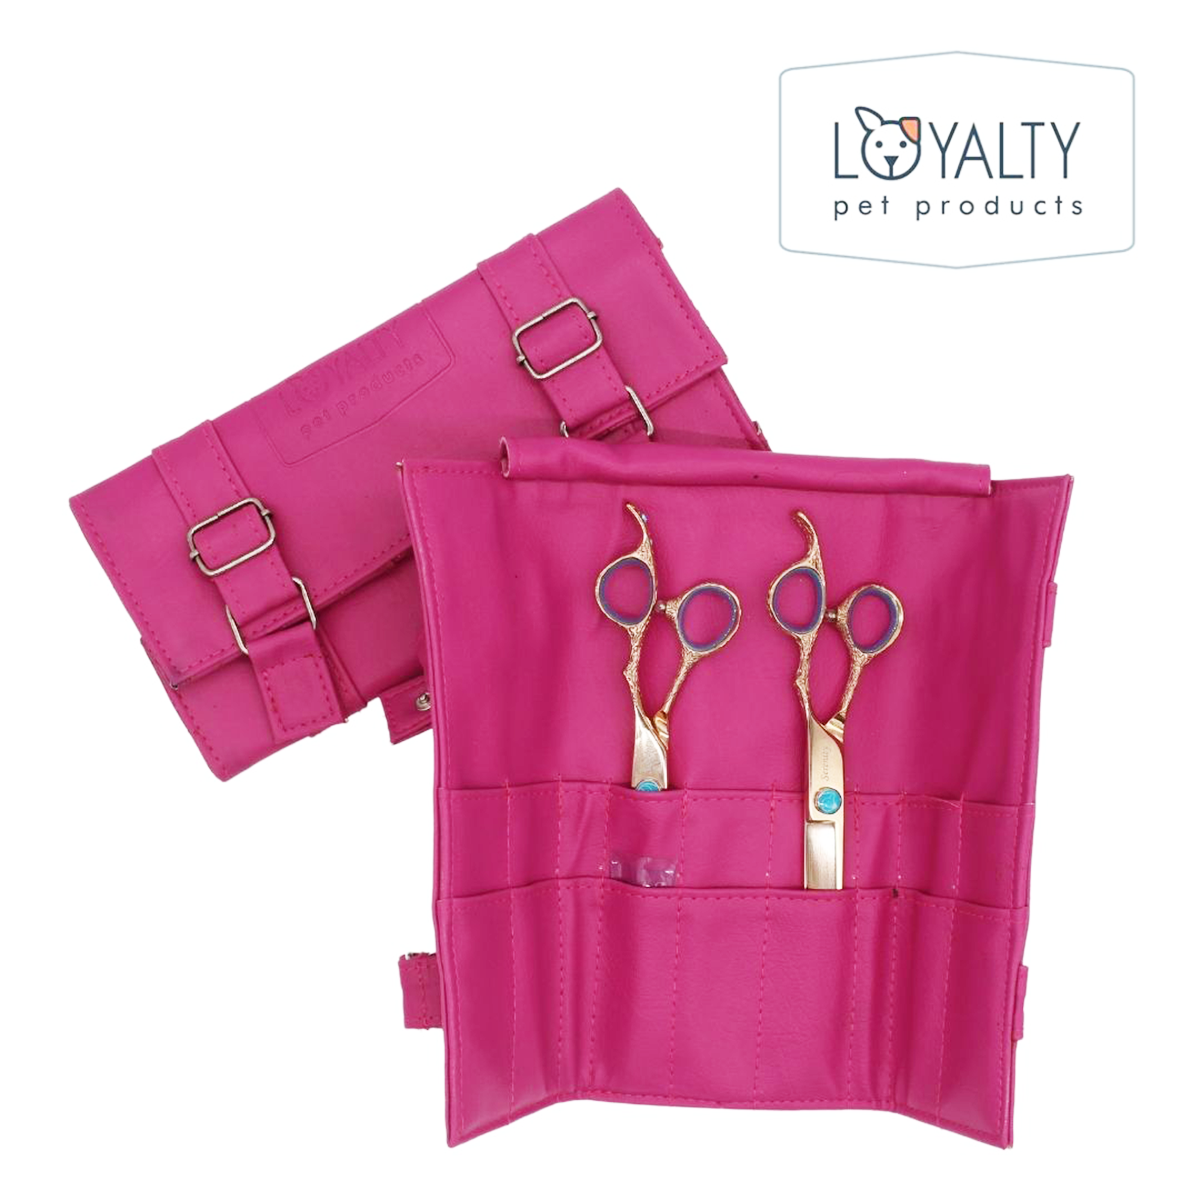 Loyalty Pet Products Grooming Shear Scissor Rollups